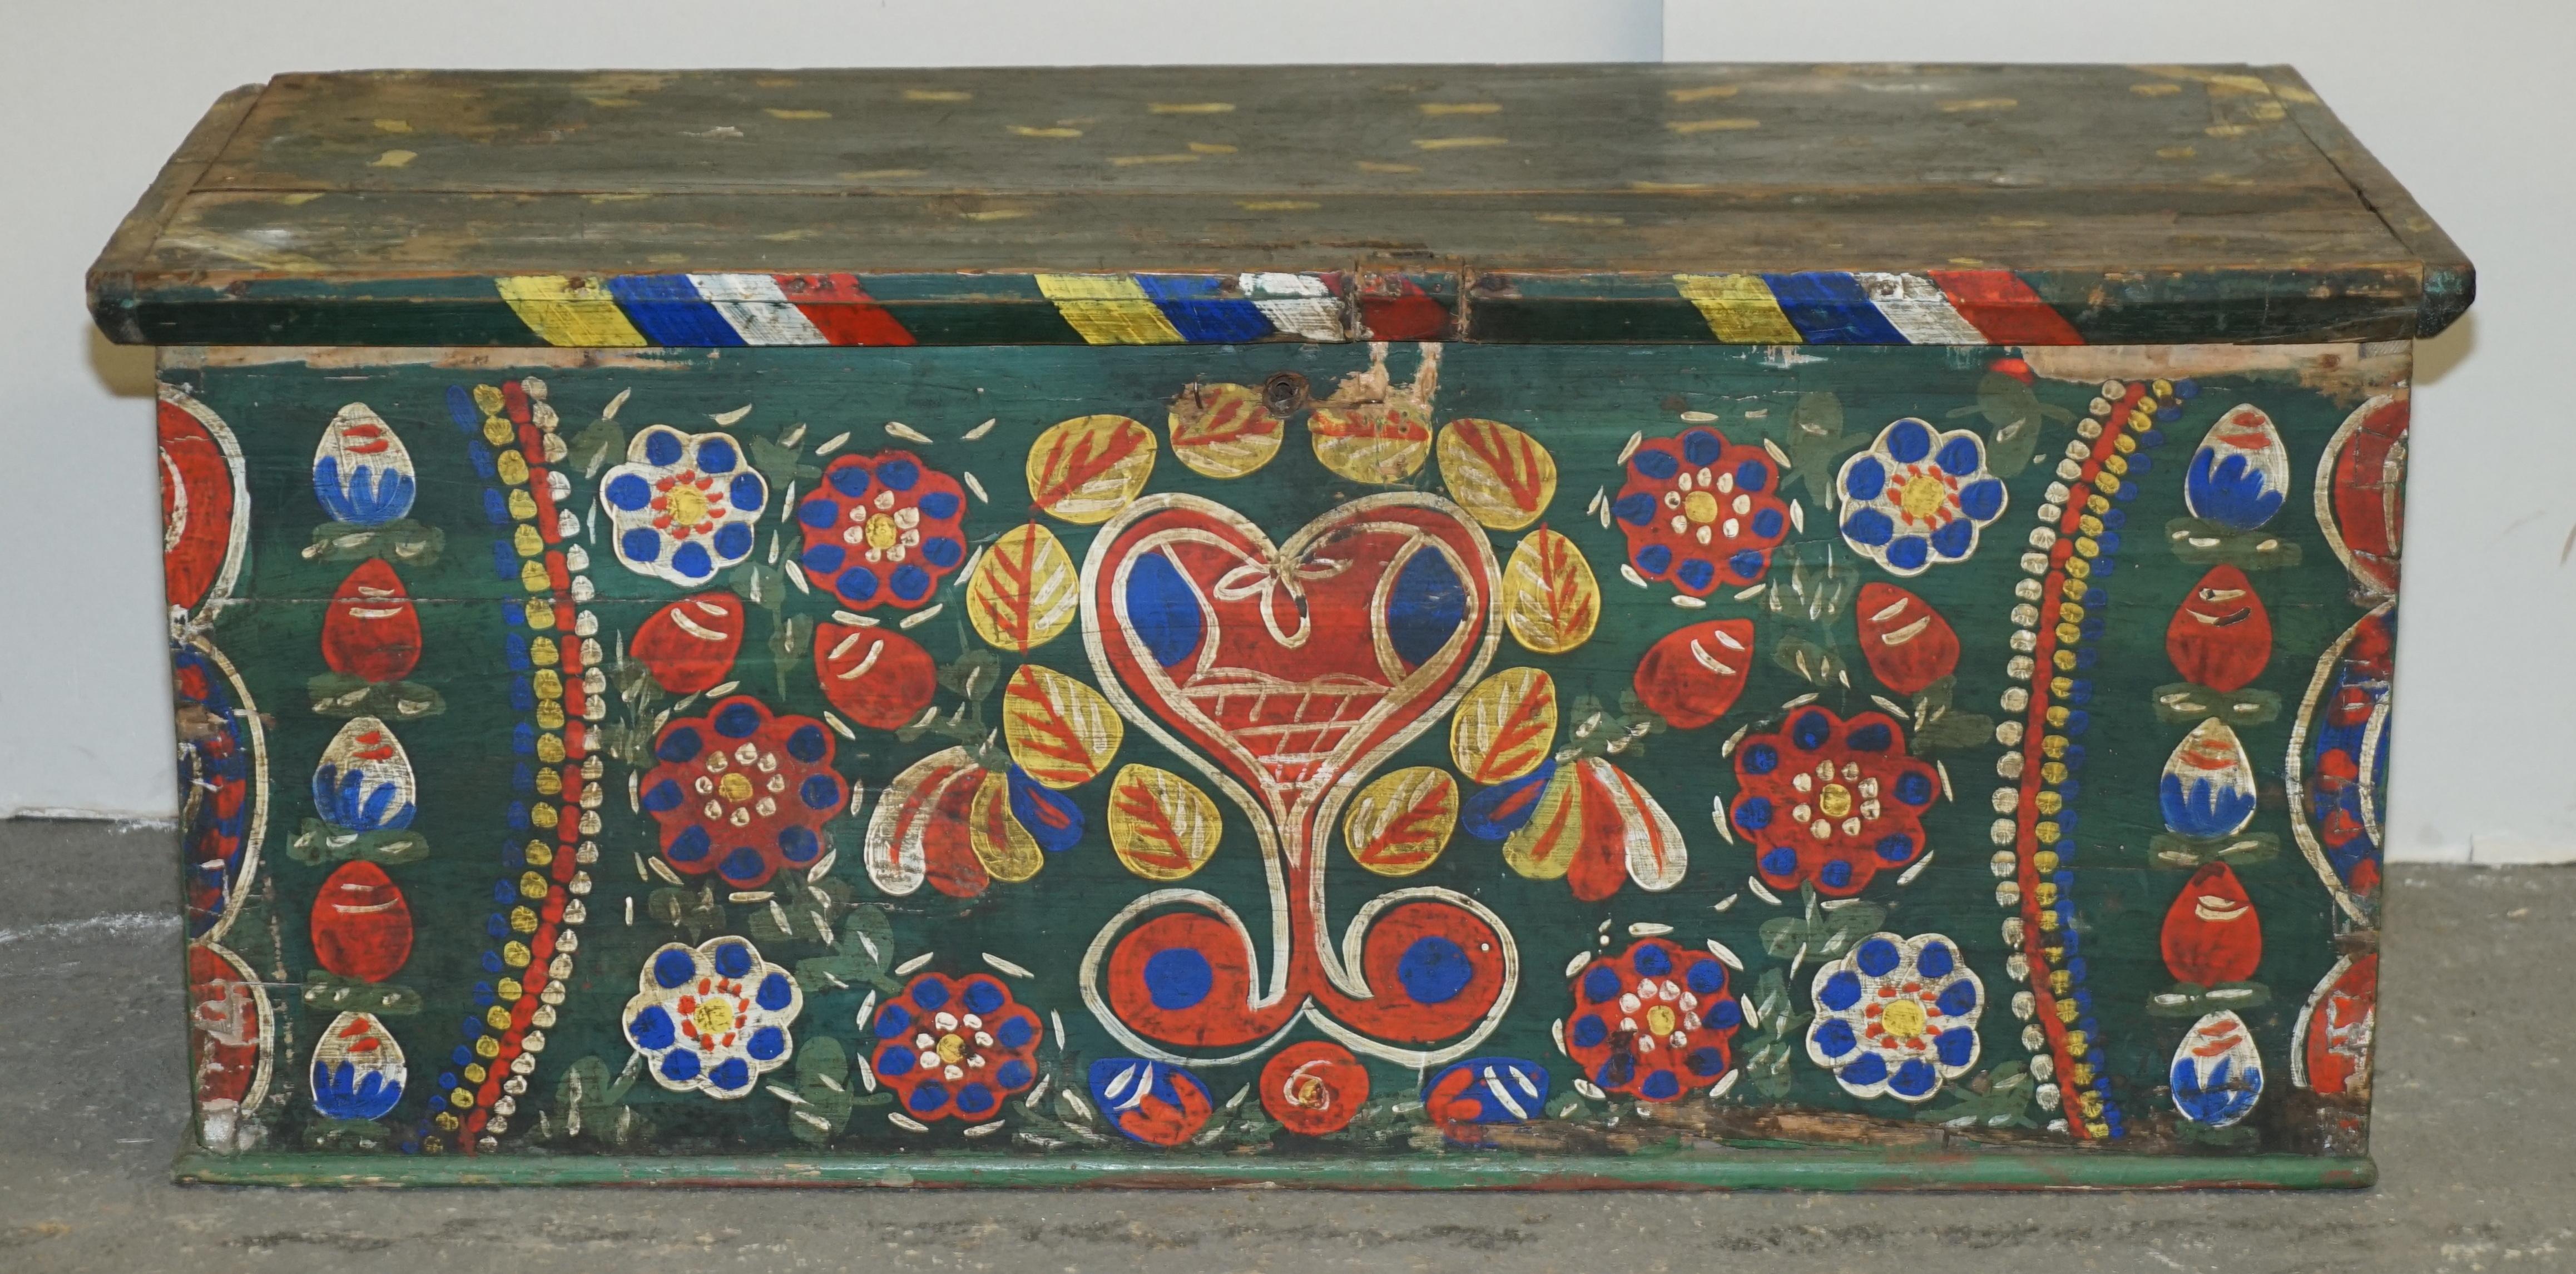 We are delighted to offer for sale this stunning, circa 1901 dated hand painted Romanian clothes trunk or marriage coffer chest depicting a large love heart with flowers

I have recently purchased a very large collection of these original, antique